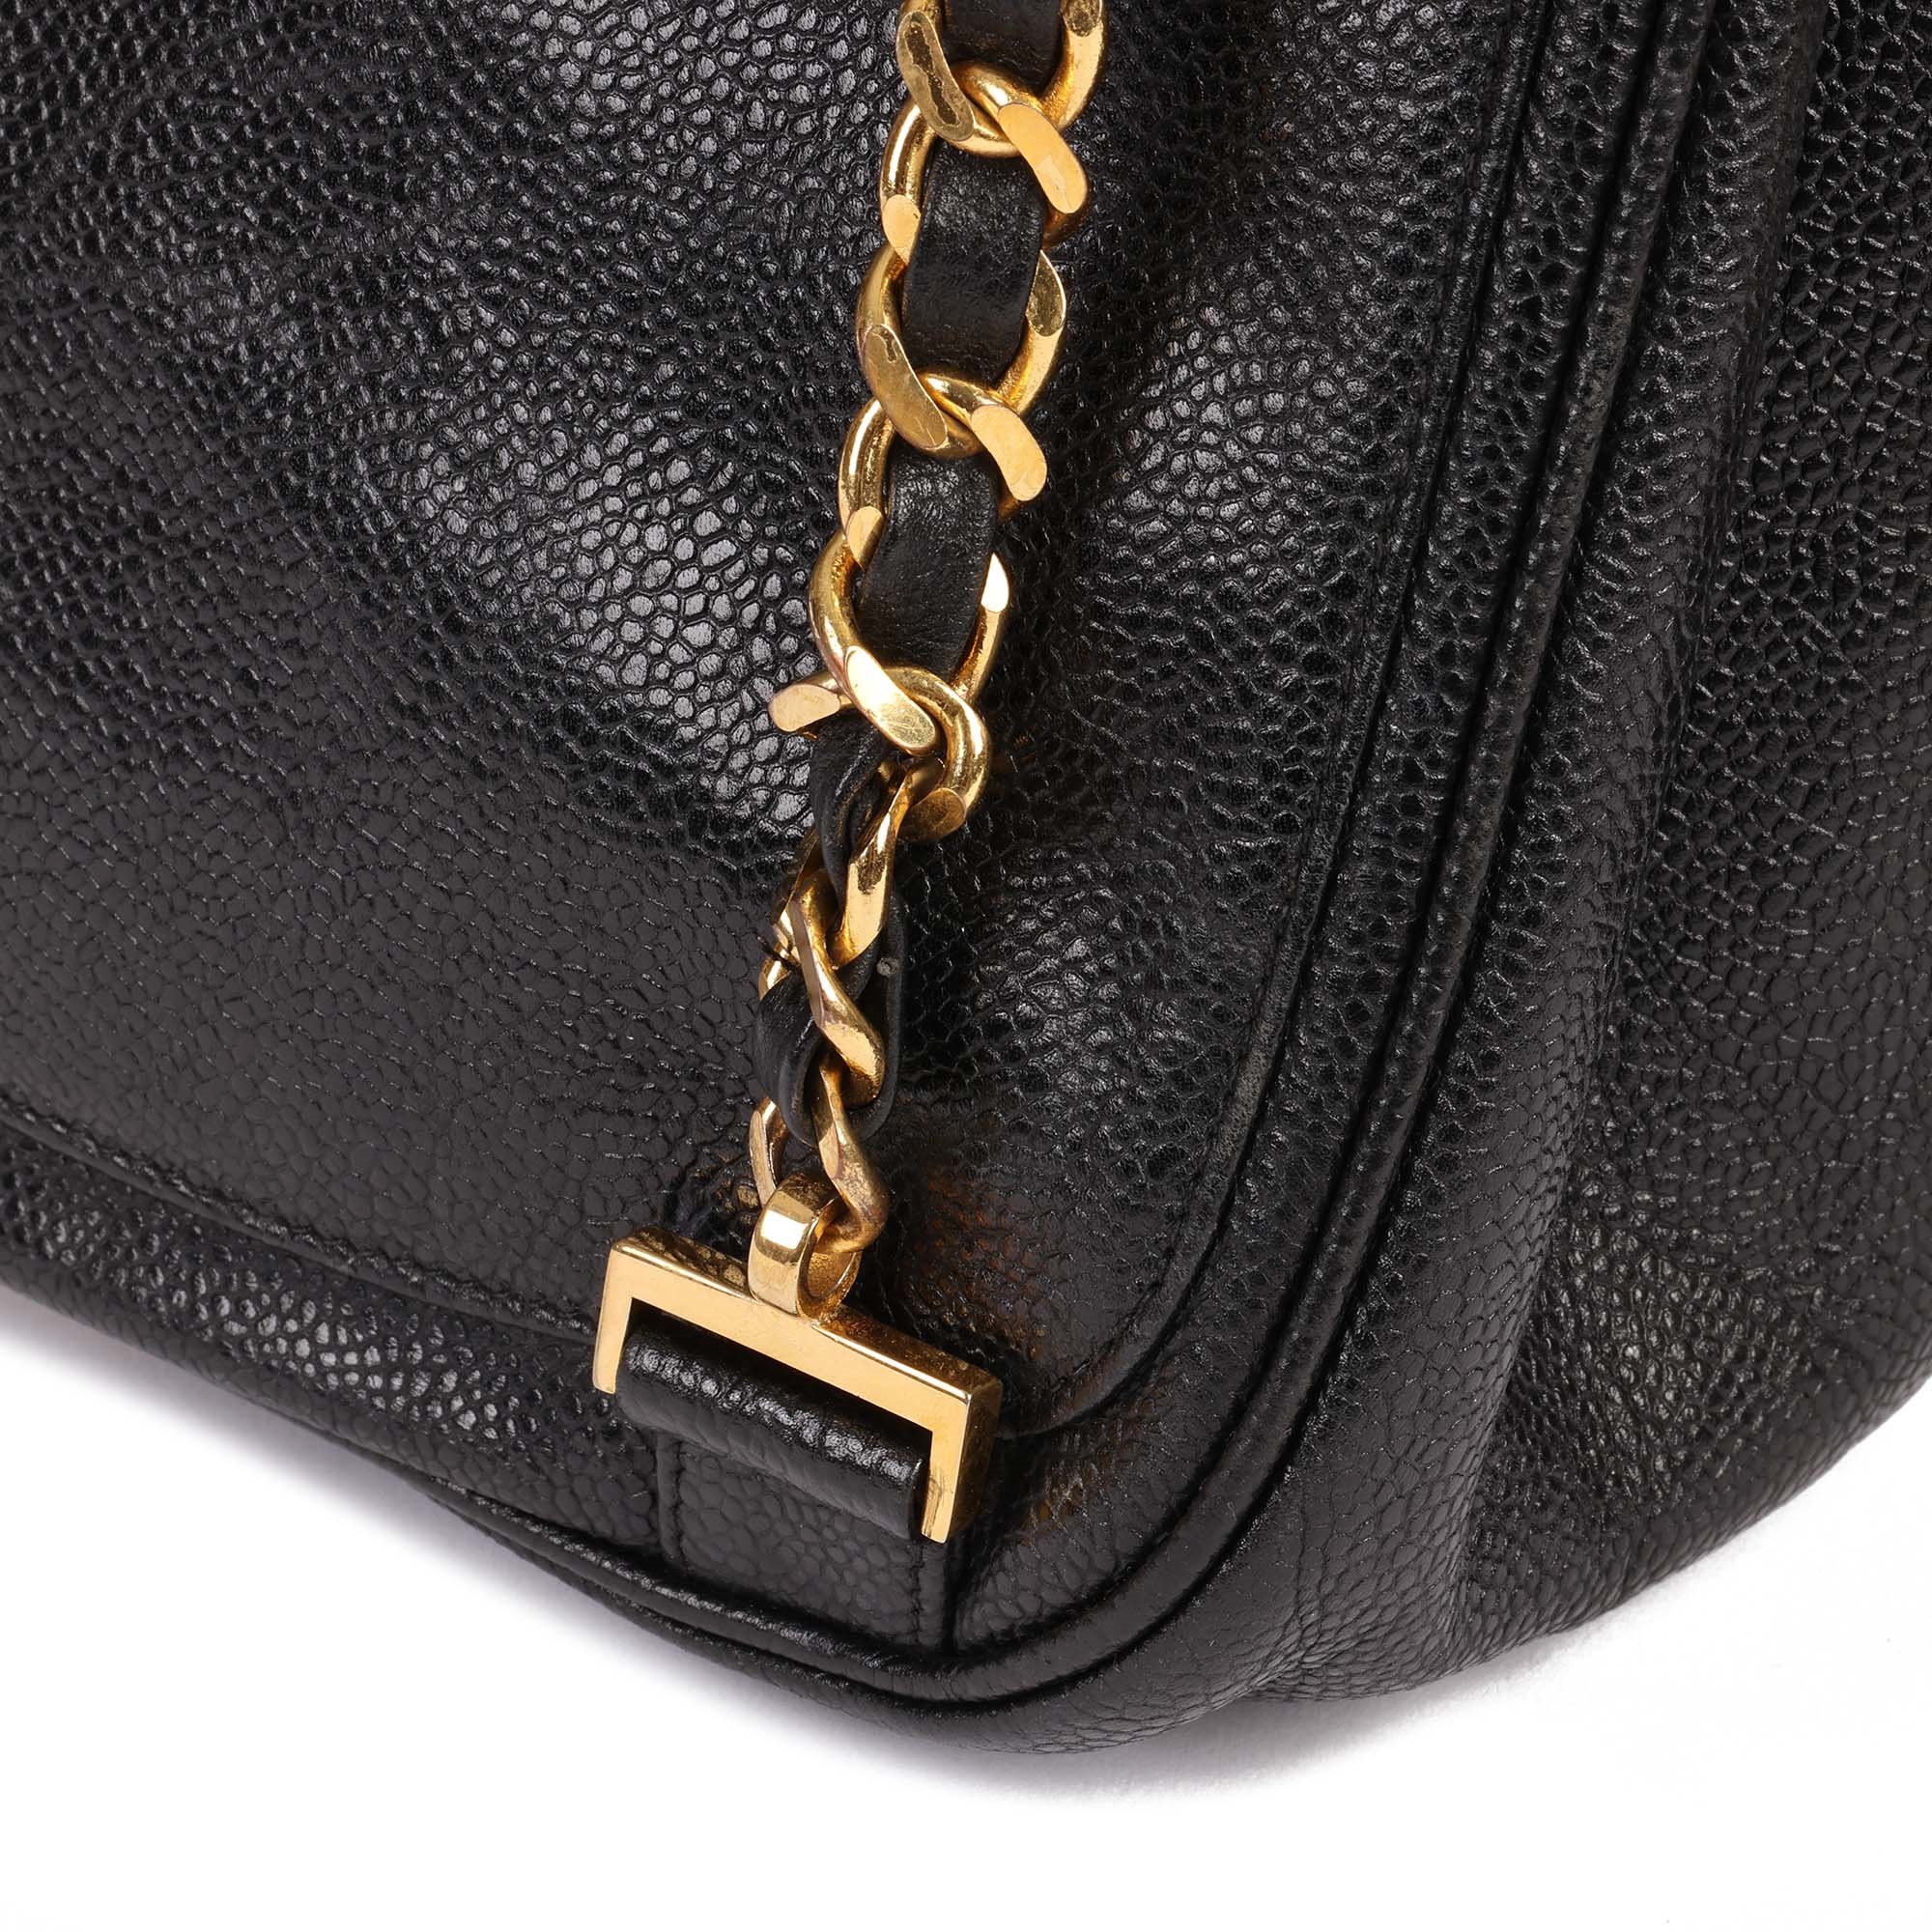 Chanel Black Caviar Leather Vintage Classic Backpack